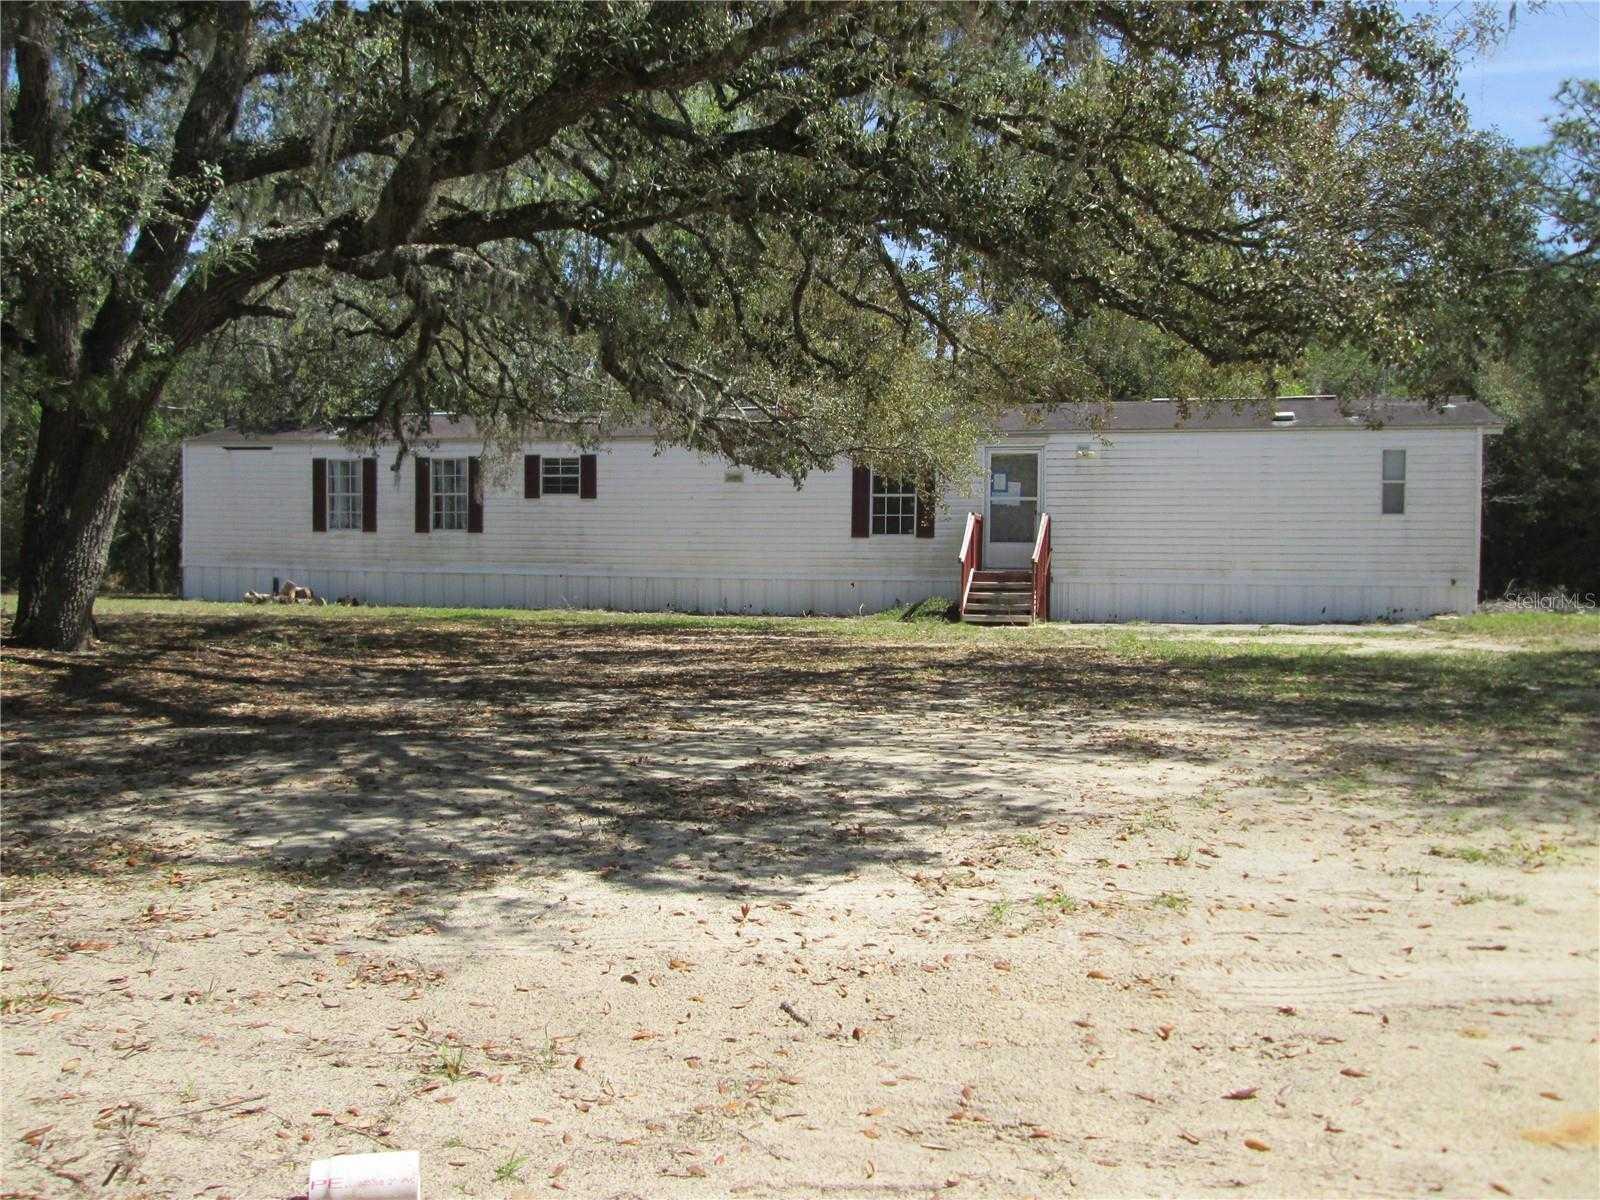 11091 101, ARCHER, Manufactured Home - Post 1977,  for sale, Crosby and Associates Inc